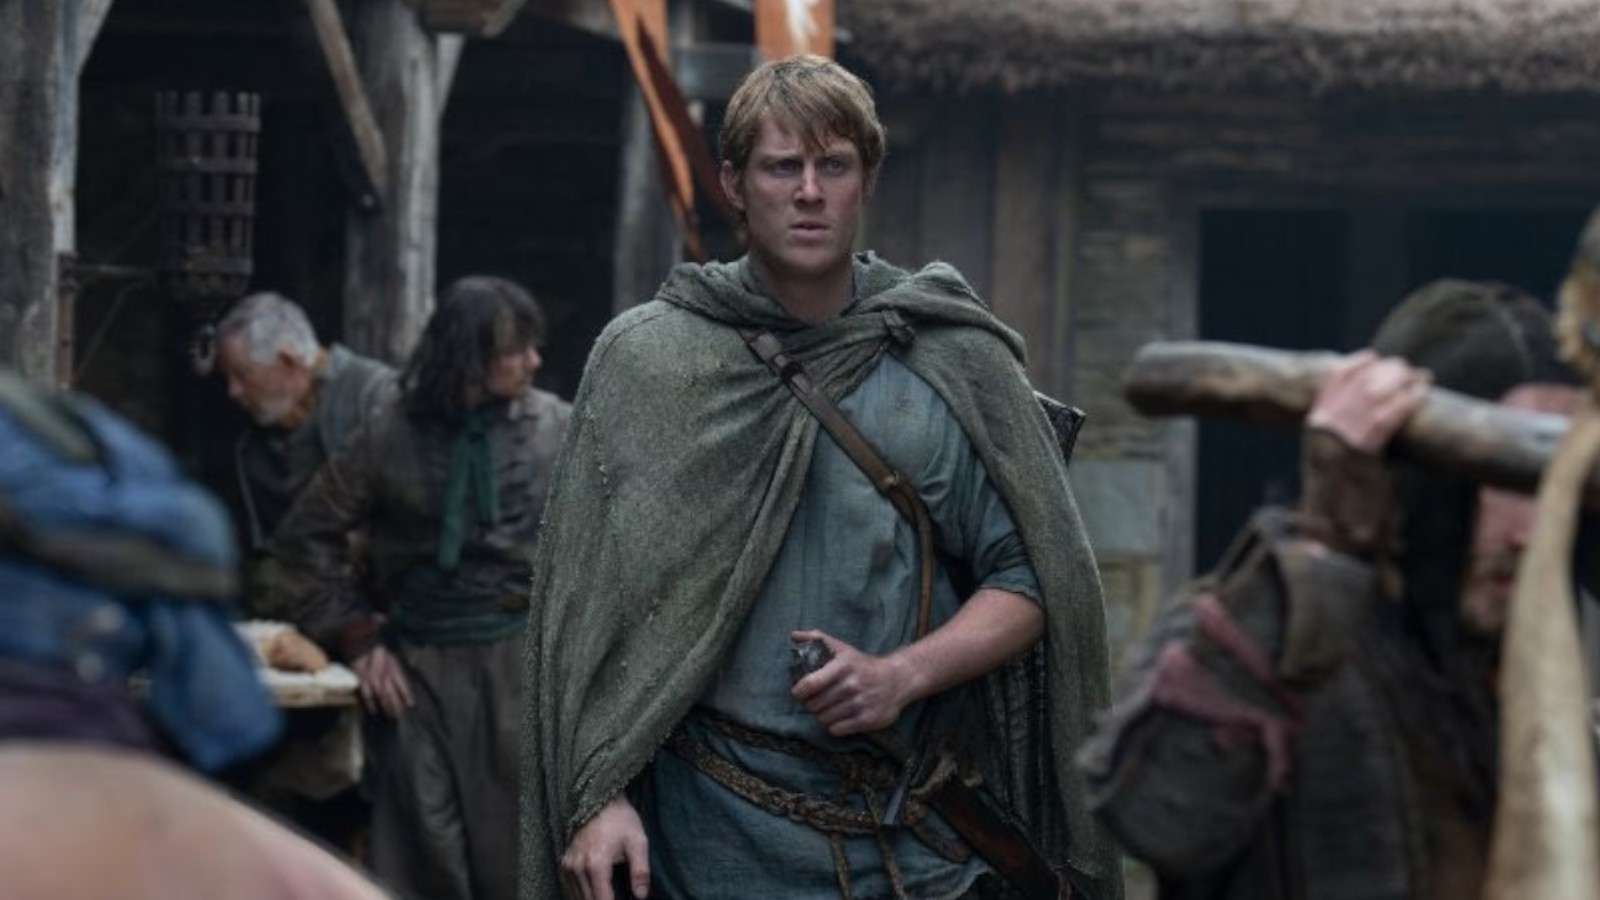 Peter Claffey as Ser Duncan the Tall in Knight of the Seven Kingdoms